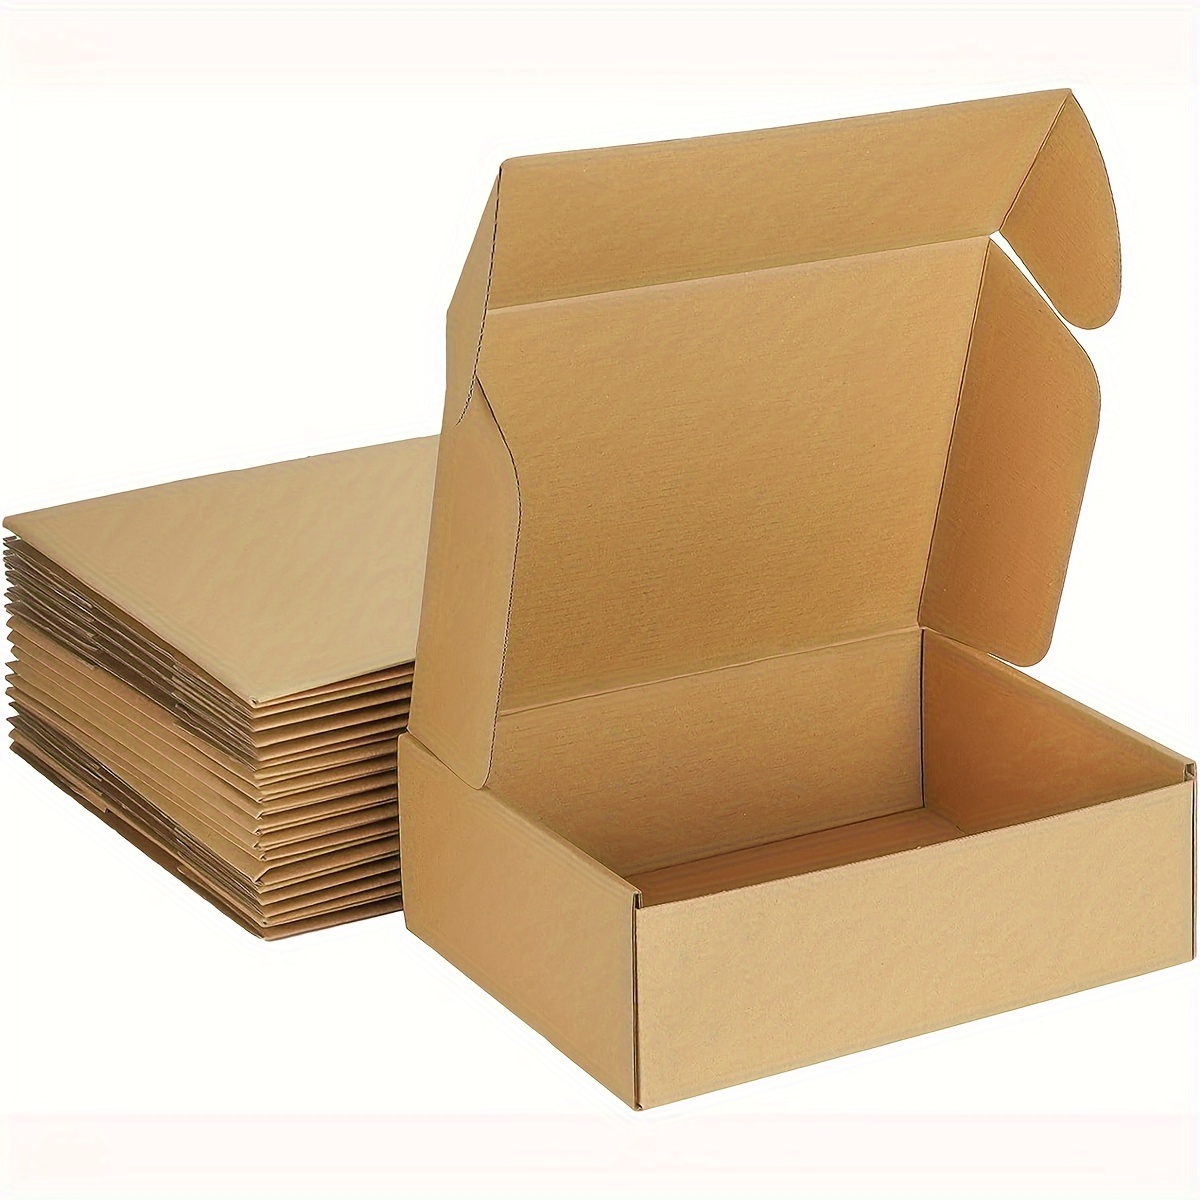 High quality leggings packaging box, socks corrugated delivery box